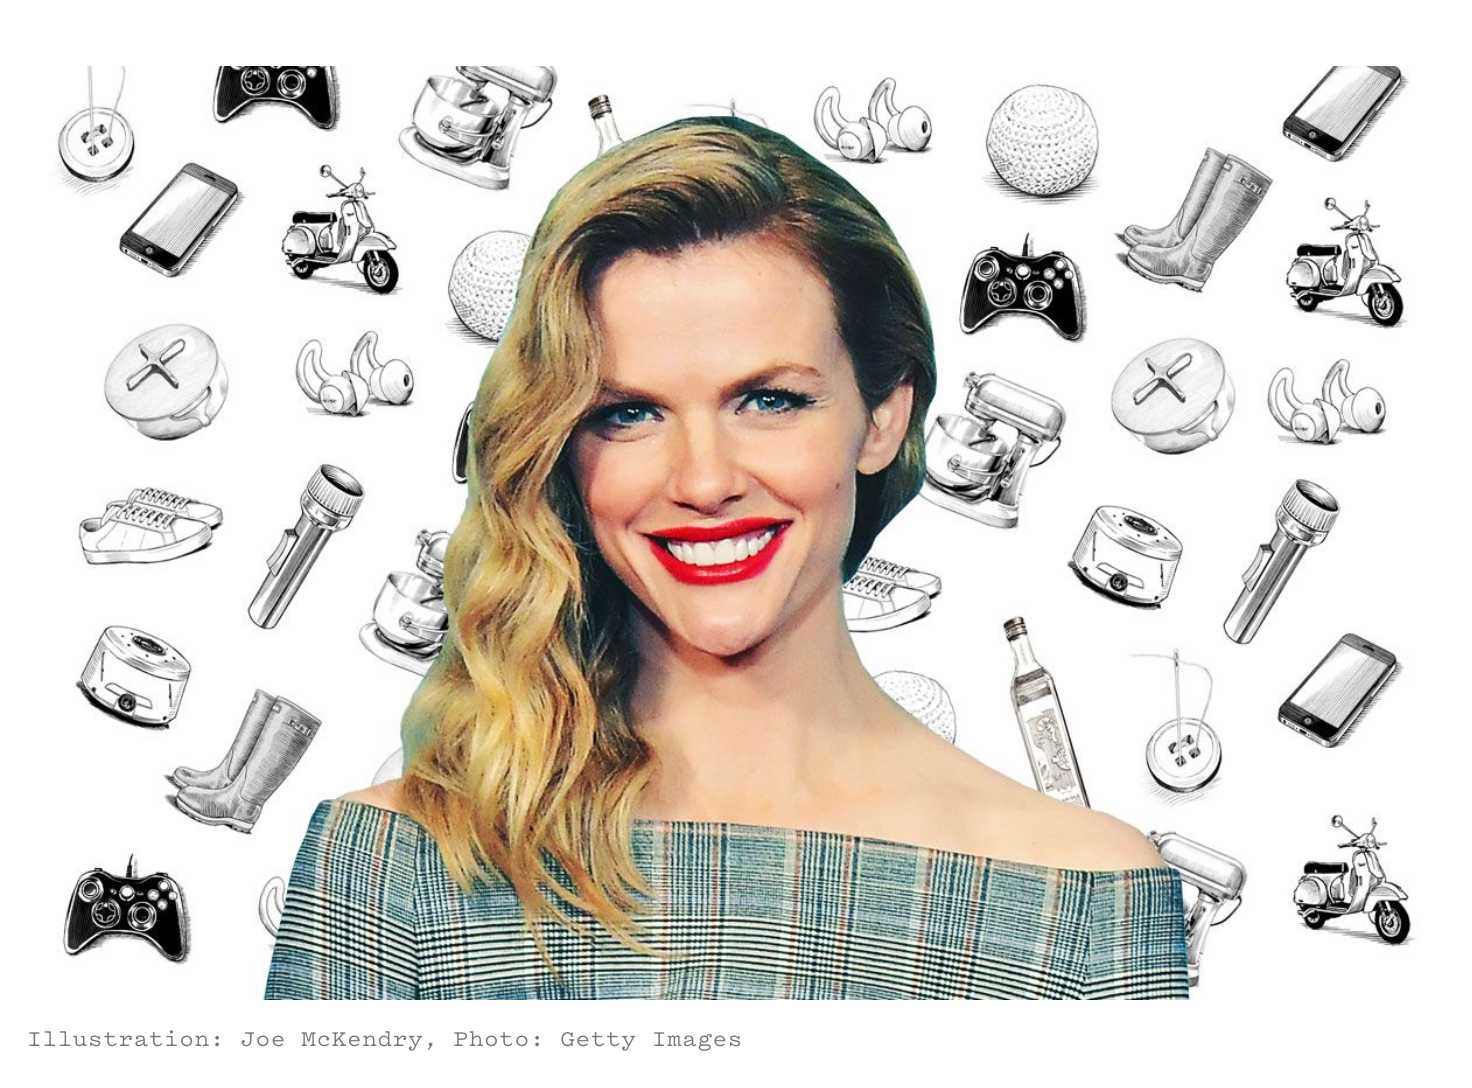 Brooklyn Decker says she "can't live without" our toothpaste! ORL